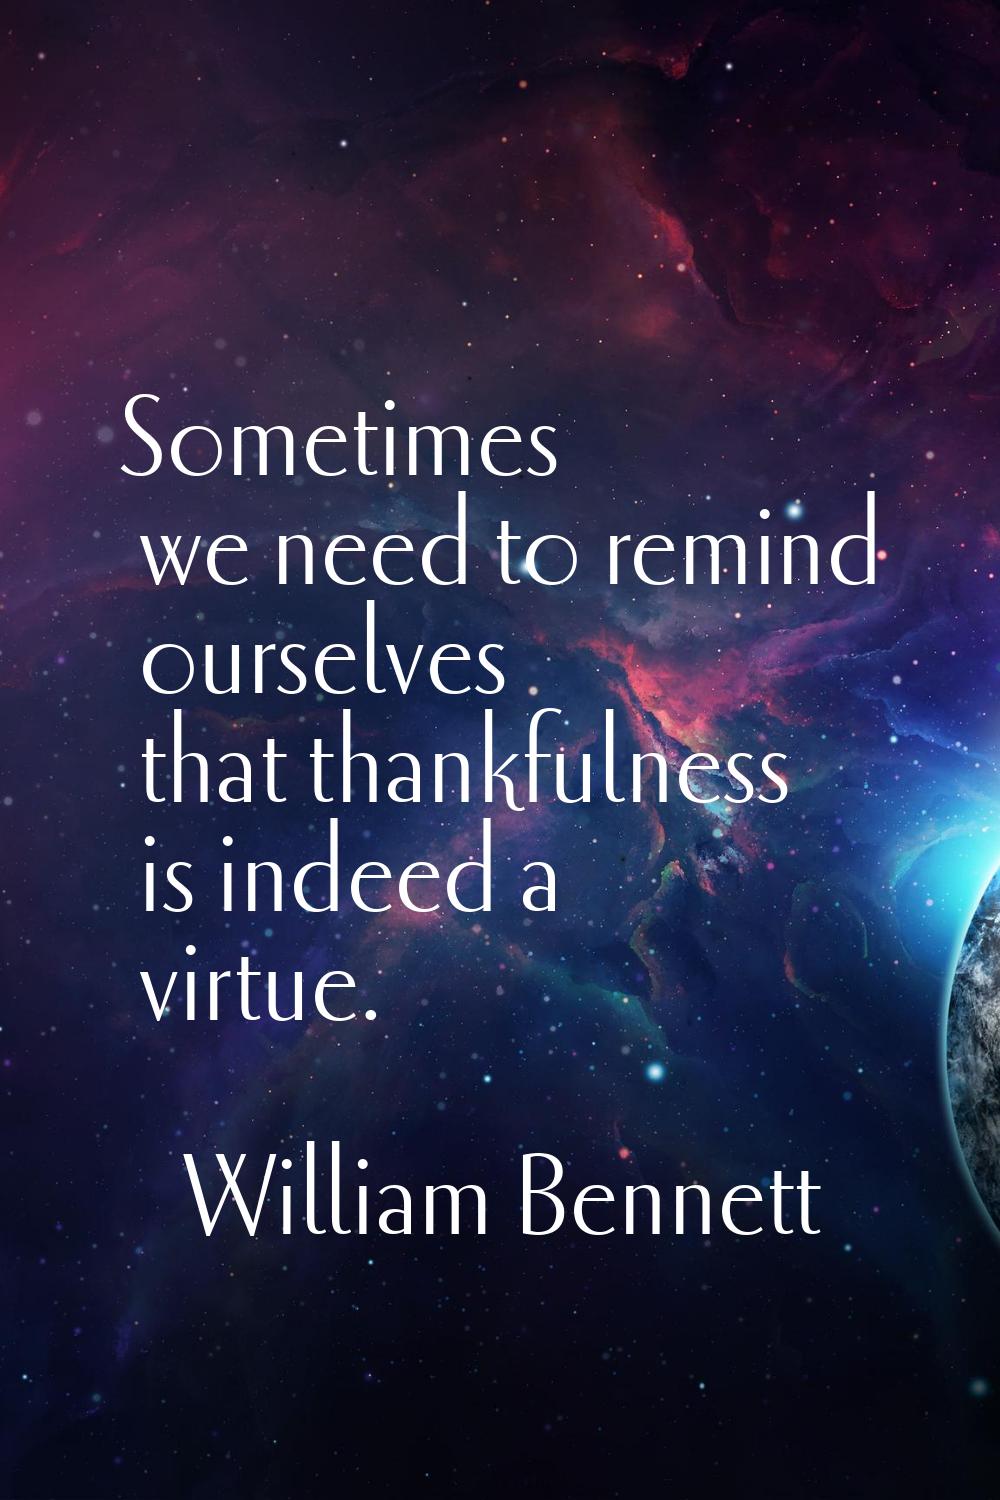 Sometimes we need to remind ourselves that thankfulness is indeed a virtue.